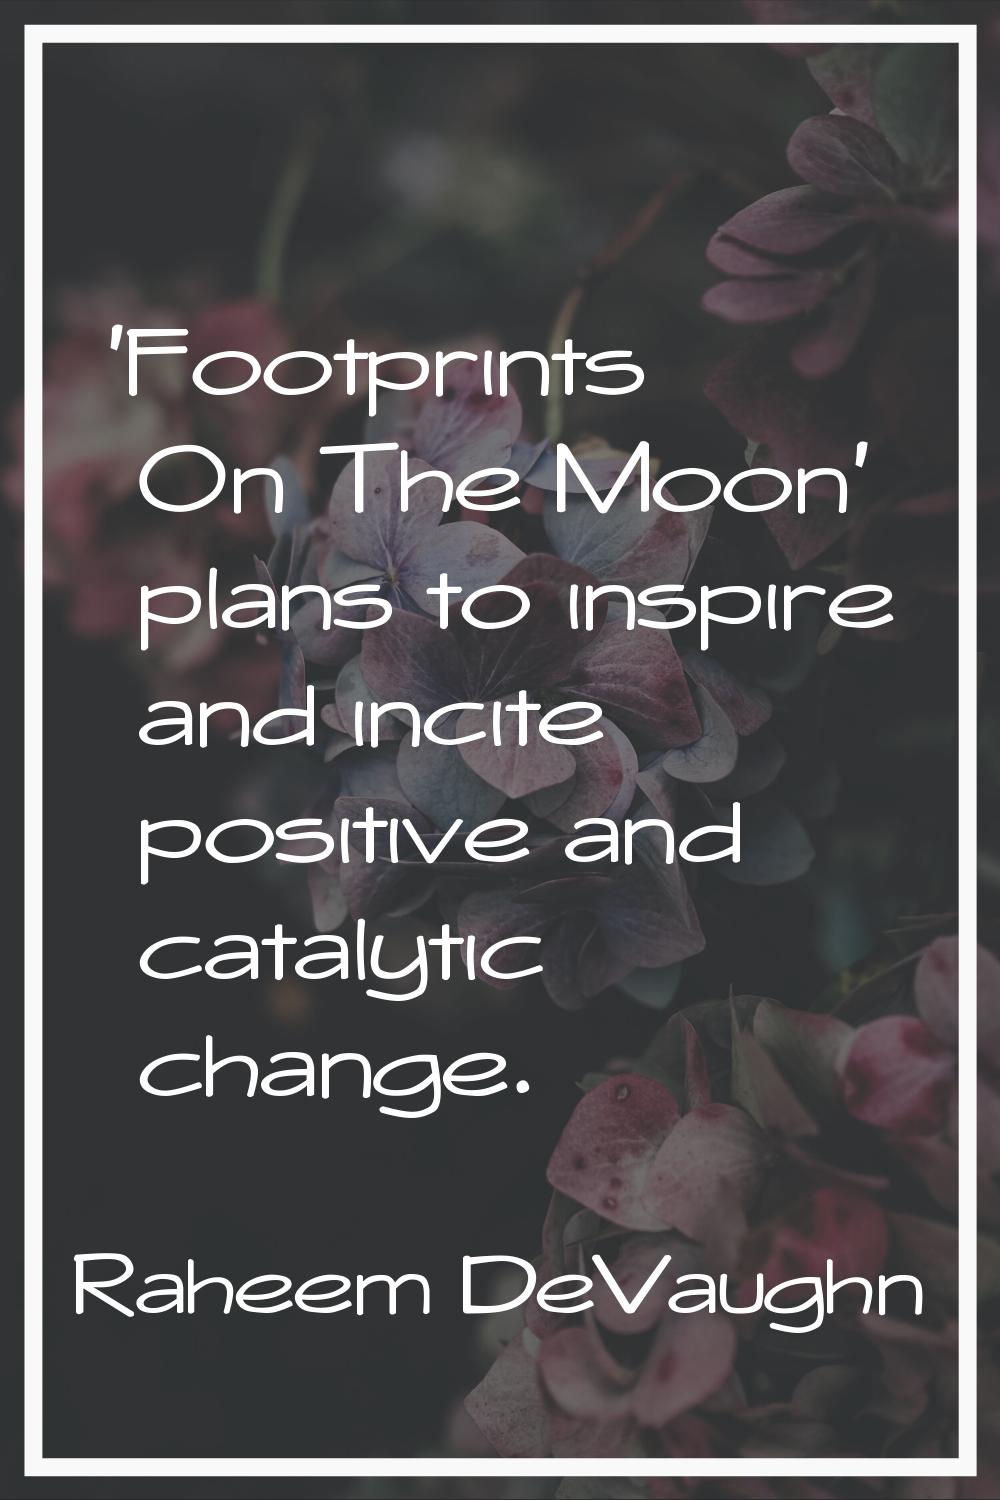 'Footprints On The Moon' plans to inspire and incite positive and catalytic change.